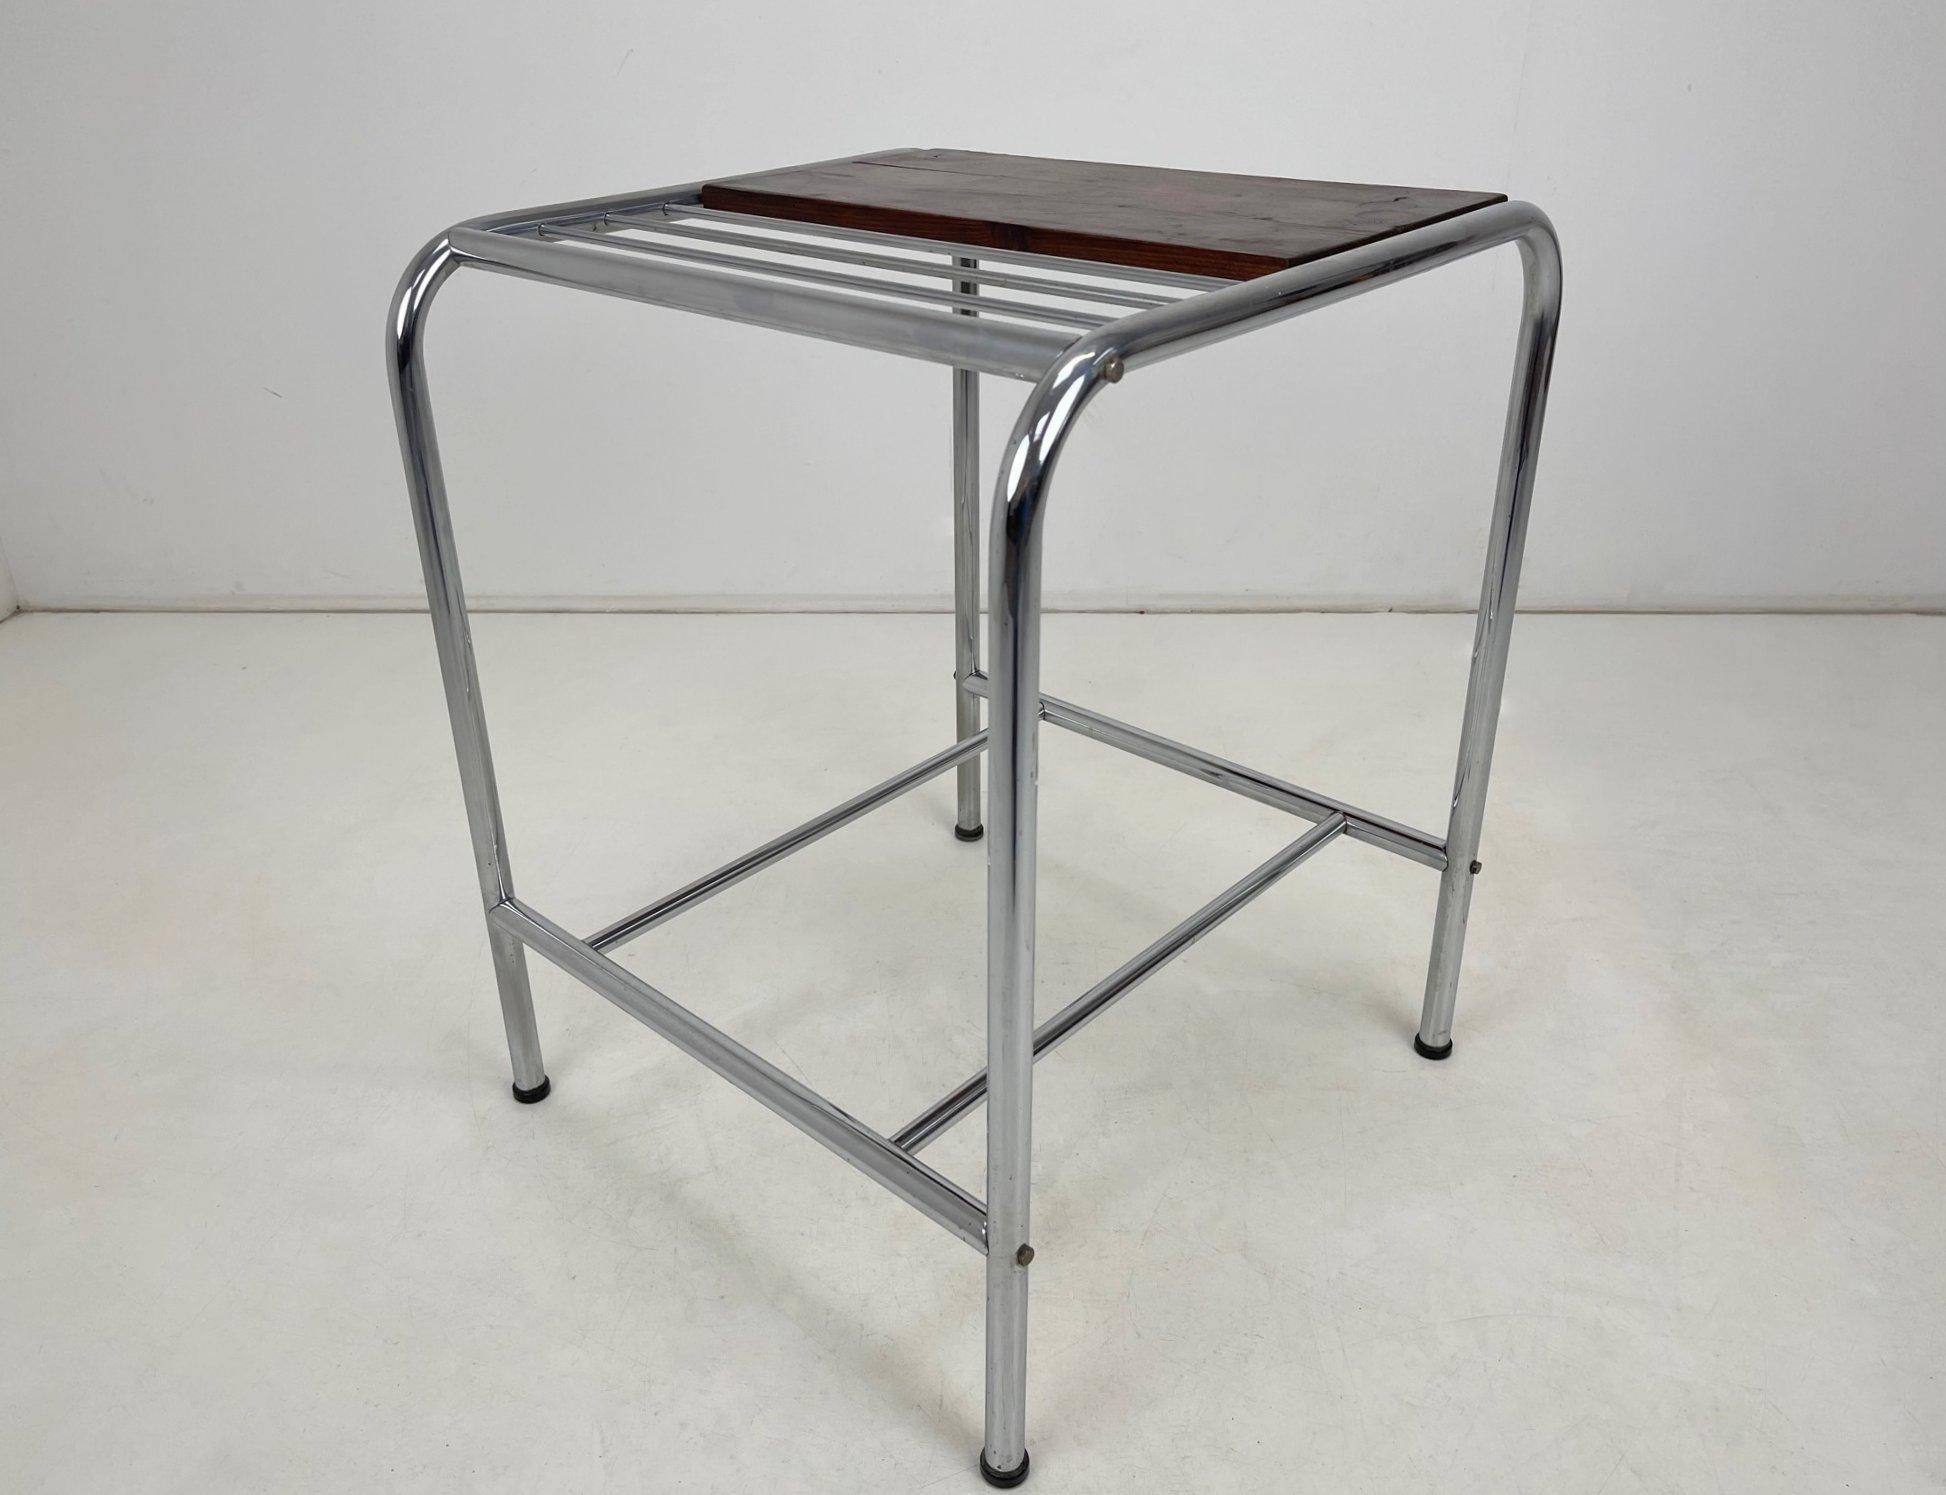 Bauhaus Functionalist Chrome & Wood Table, 1950's For Sale